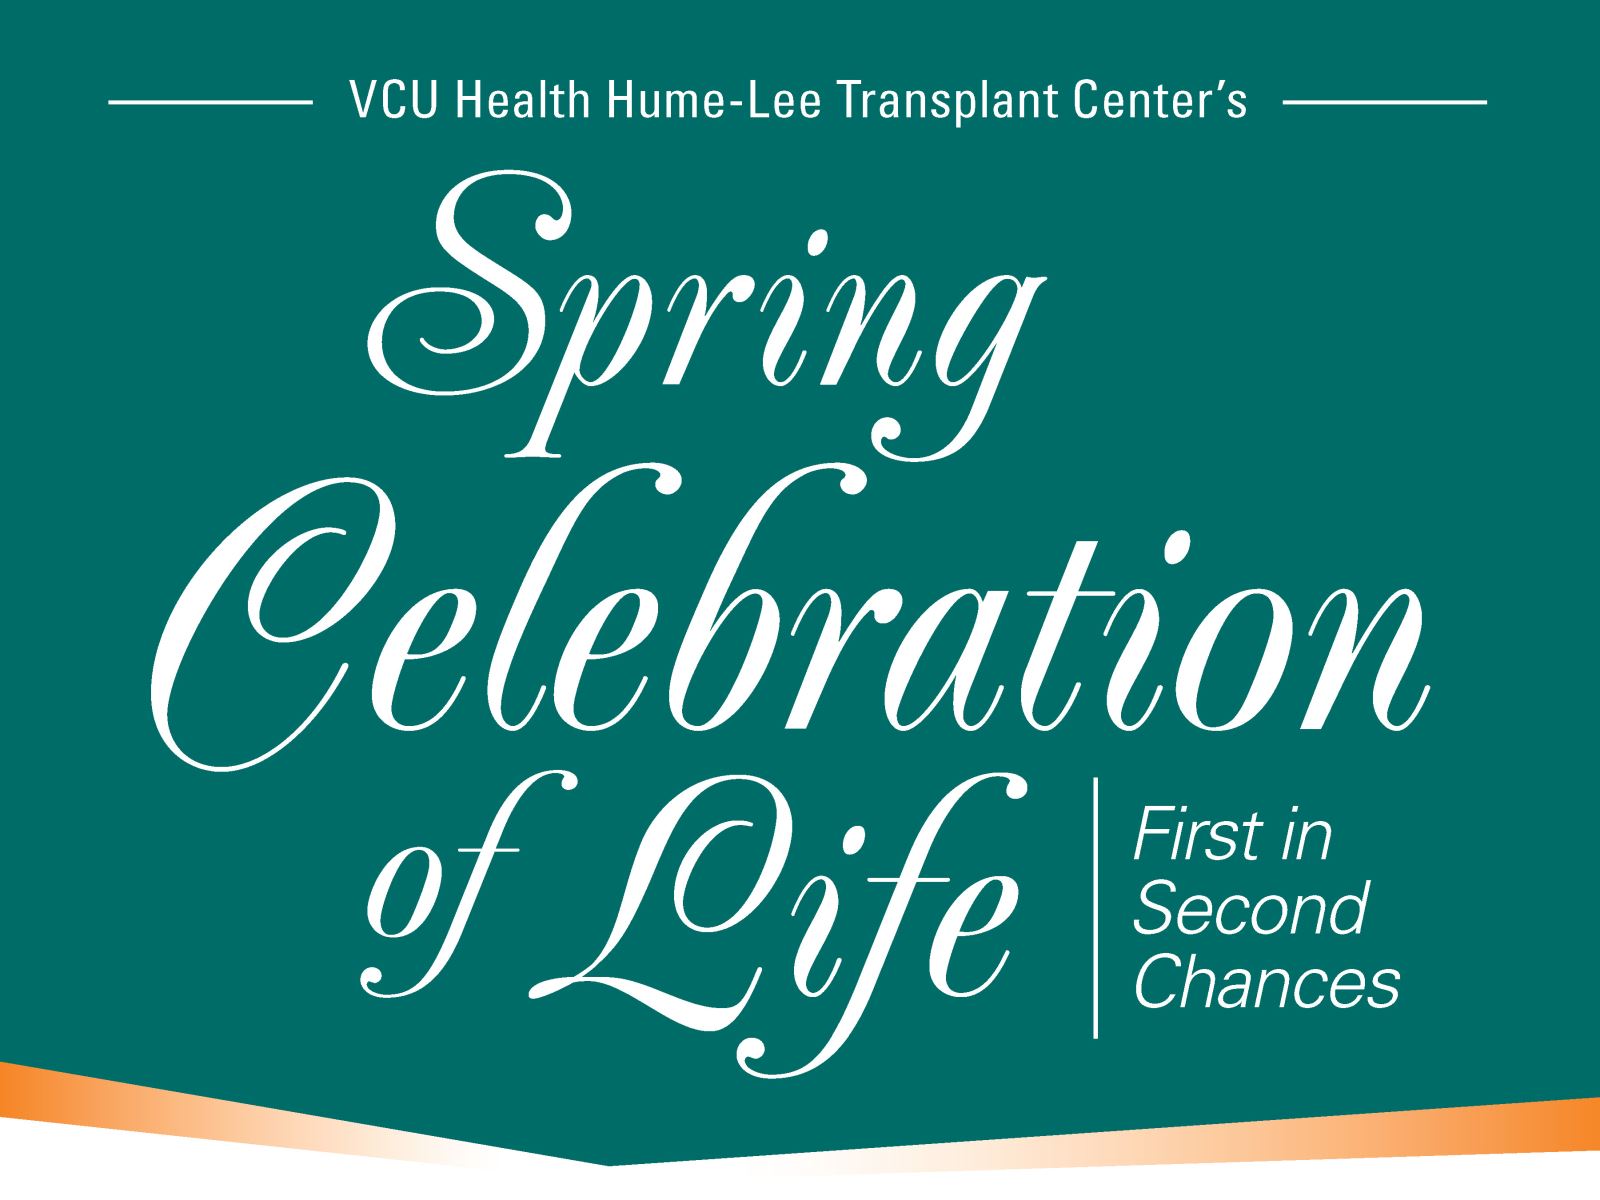 VCU Health Hume-Lee Transplant Center's Spring Celebration of Life, First in Second Chances